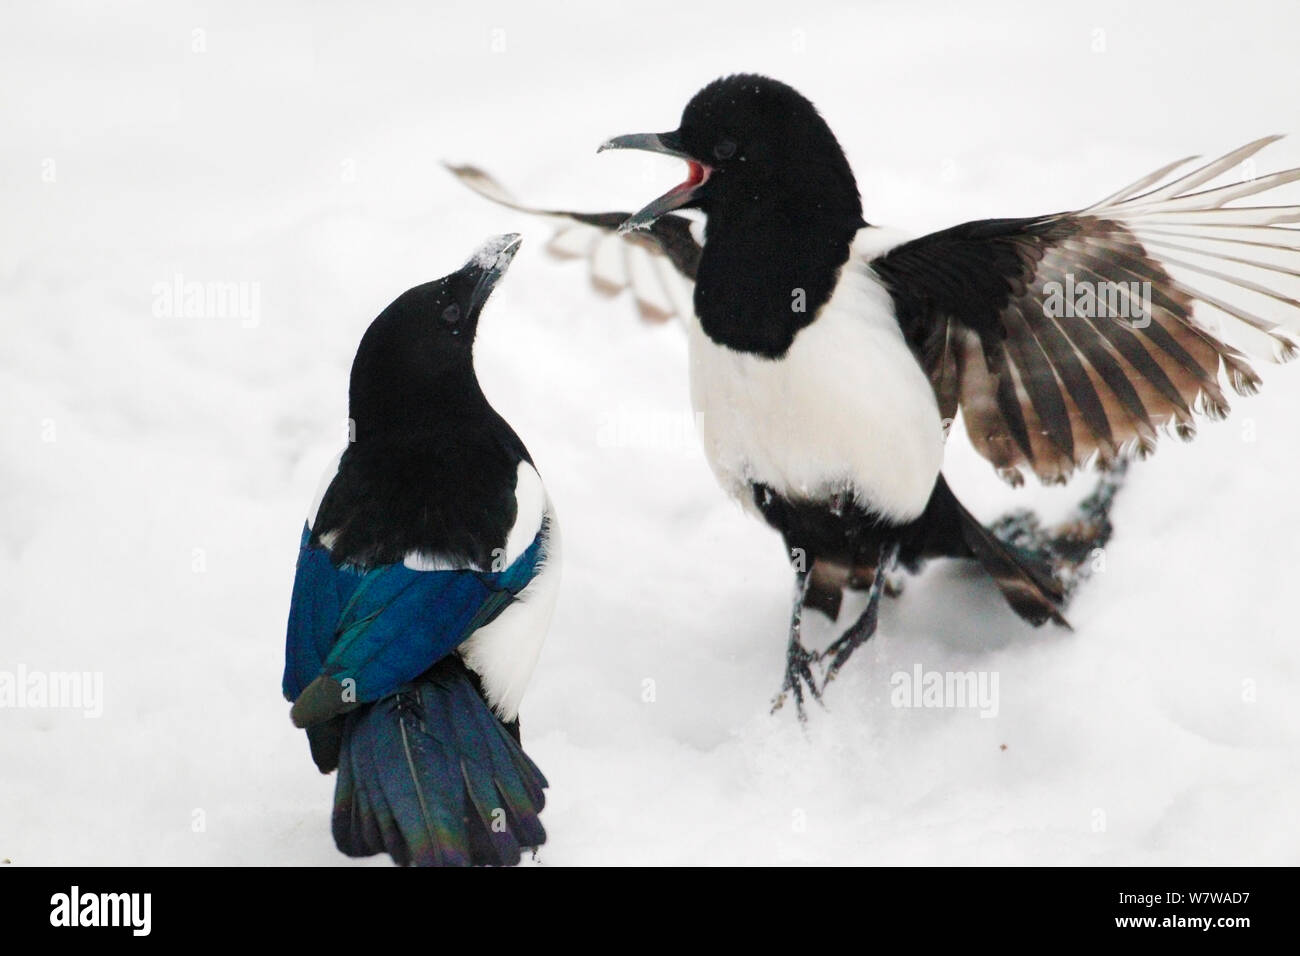 Magpies (Pica pica) in fight in snow, Norway, January. Stock Photo